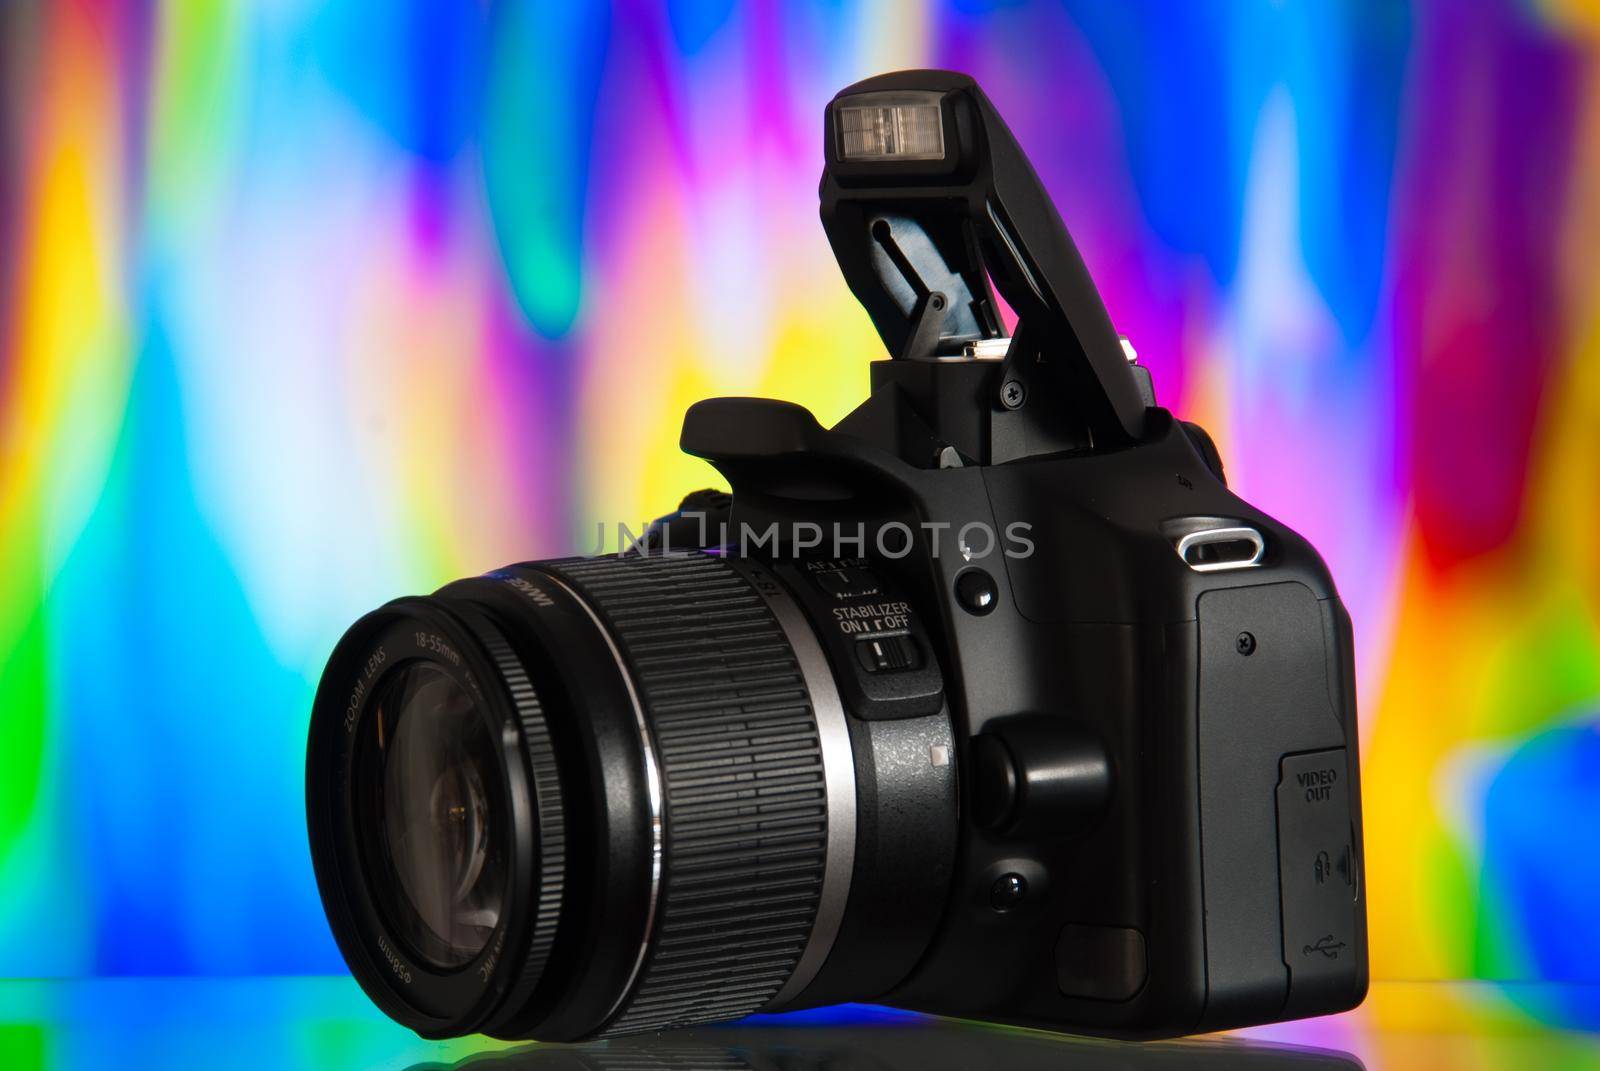 Dslr camera isolated on colorful background with reflection